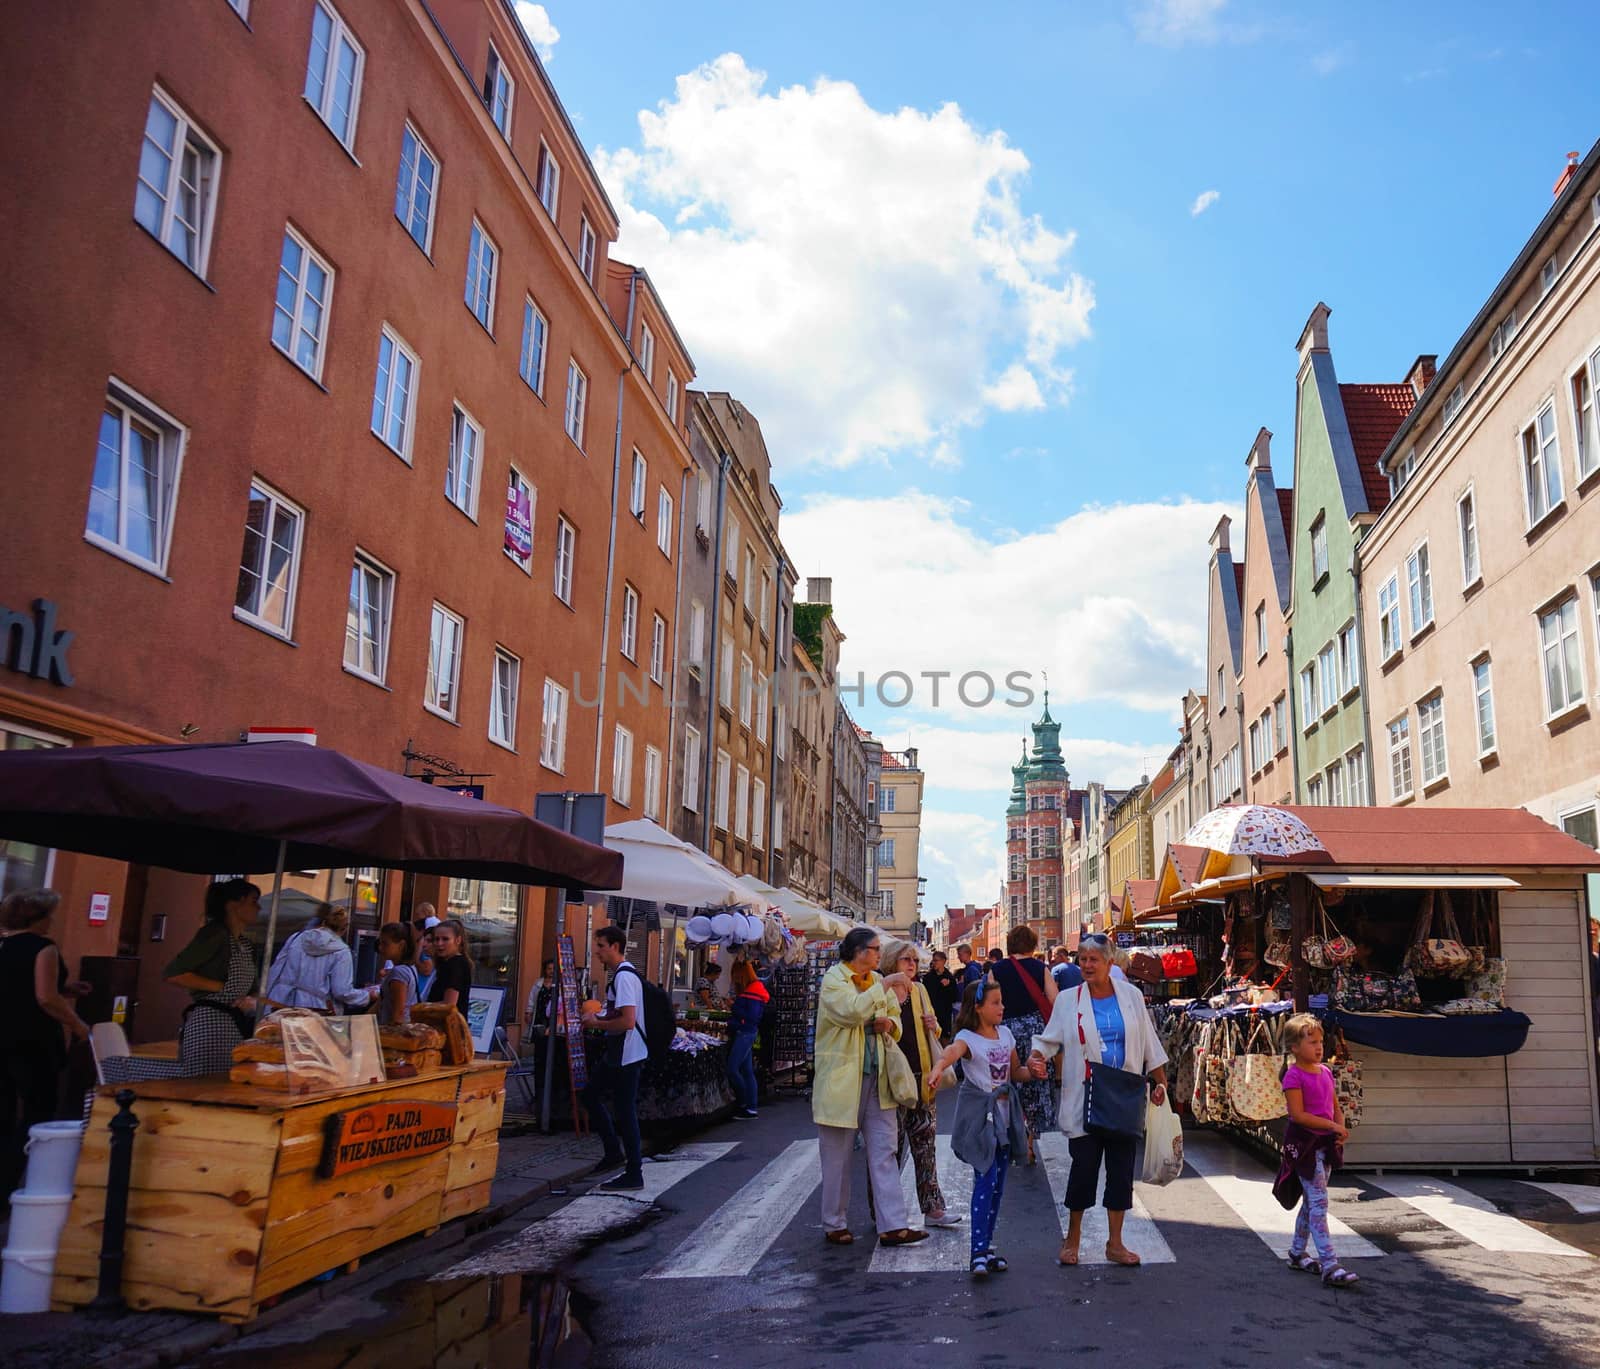 GDANSK, POLAND - JULY 29, 2015: People walking on the street at a traditional yearly market in the city center